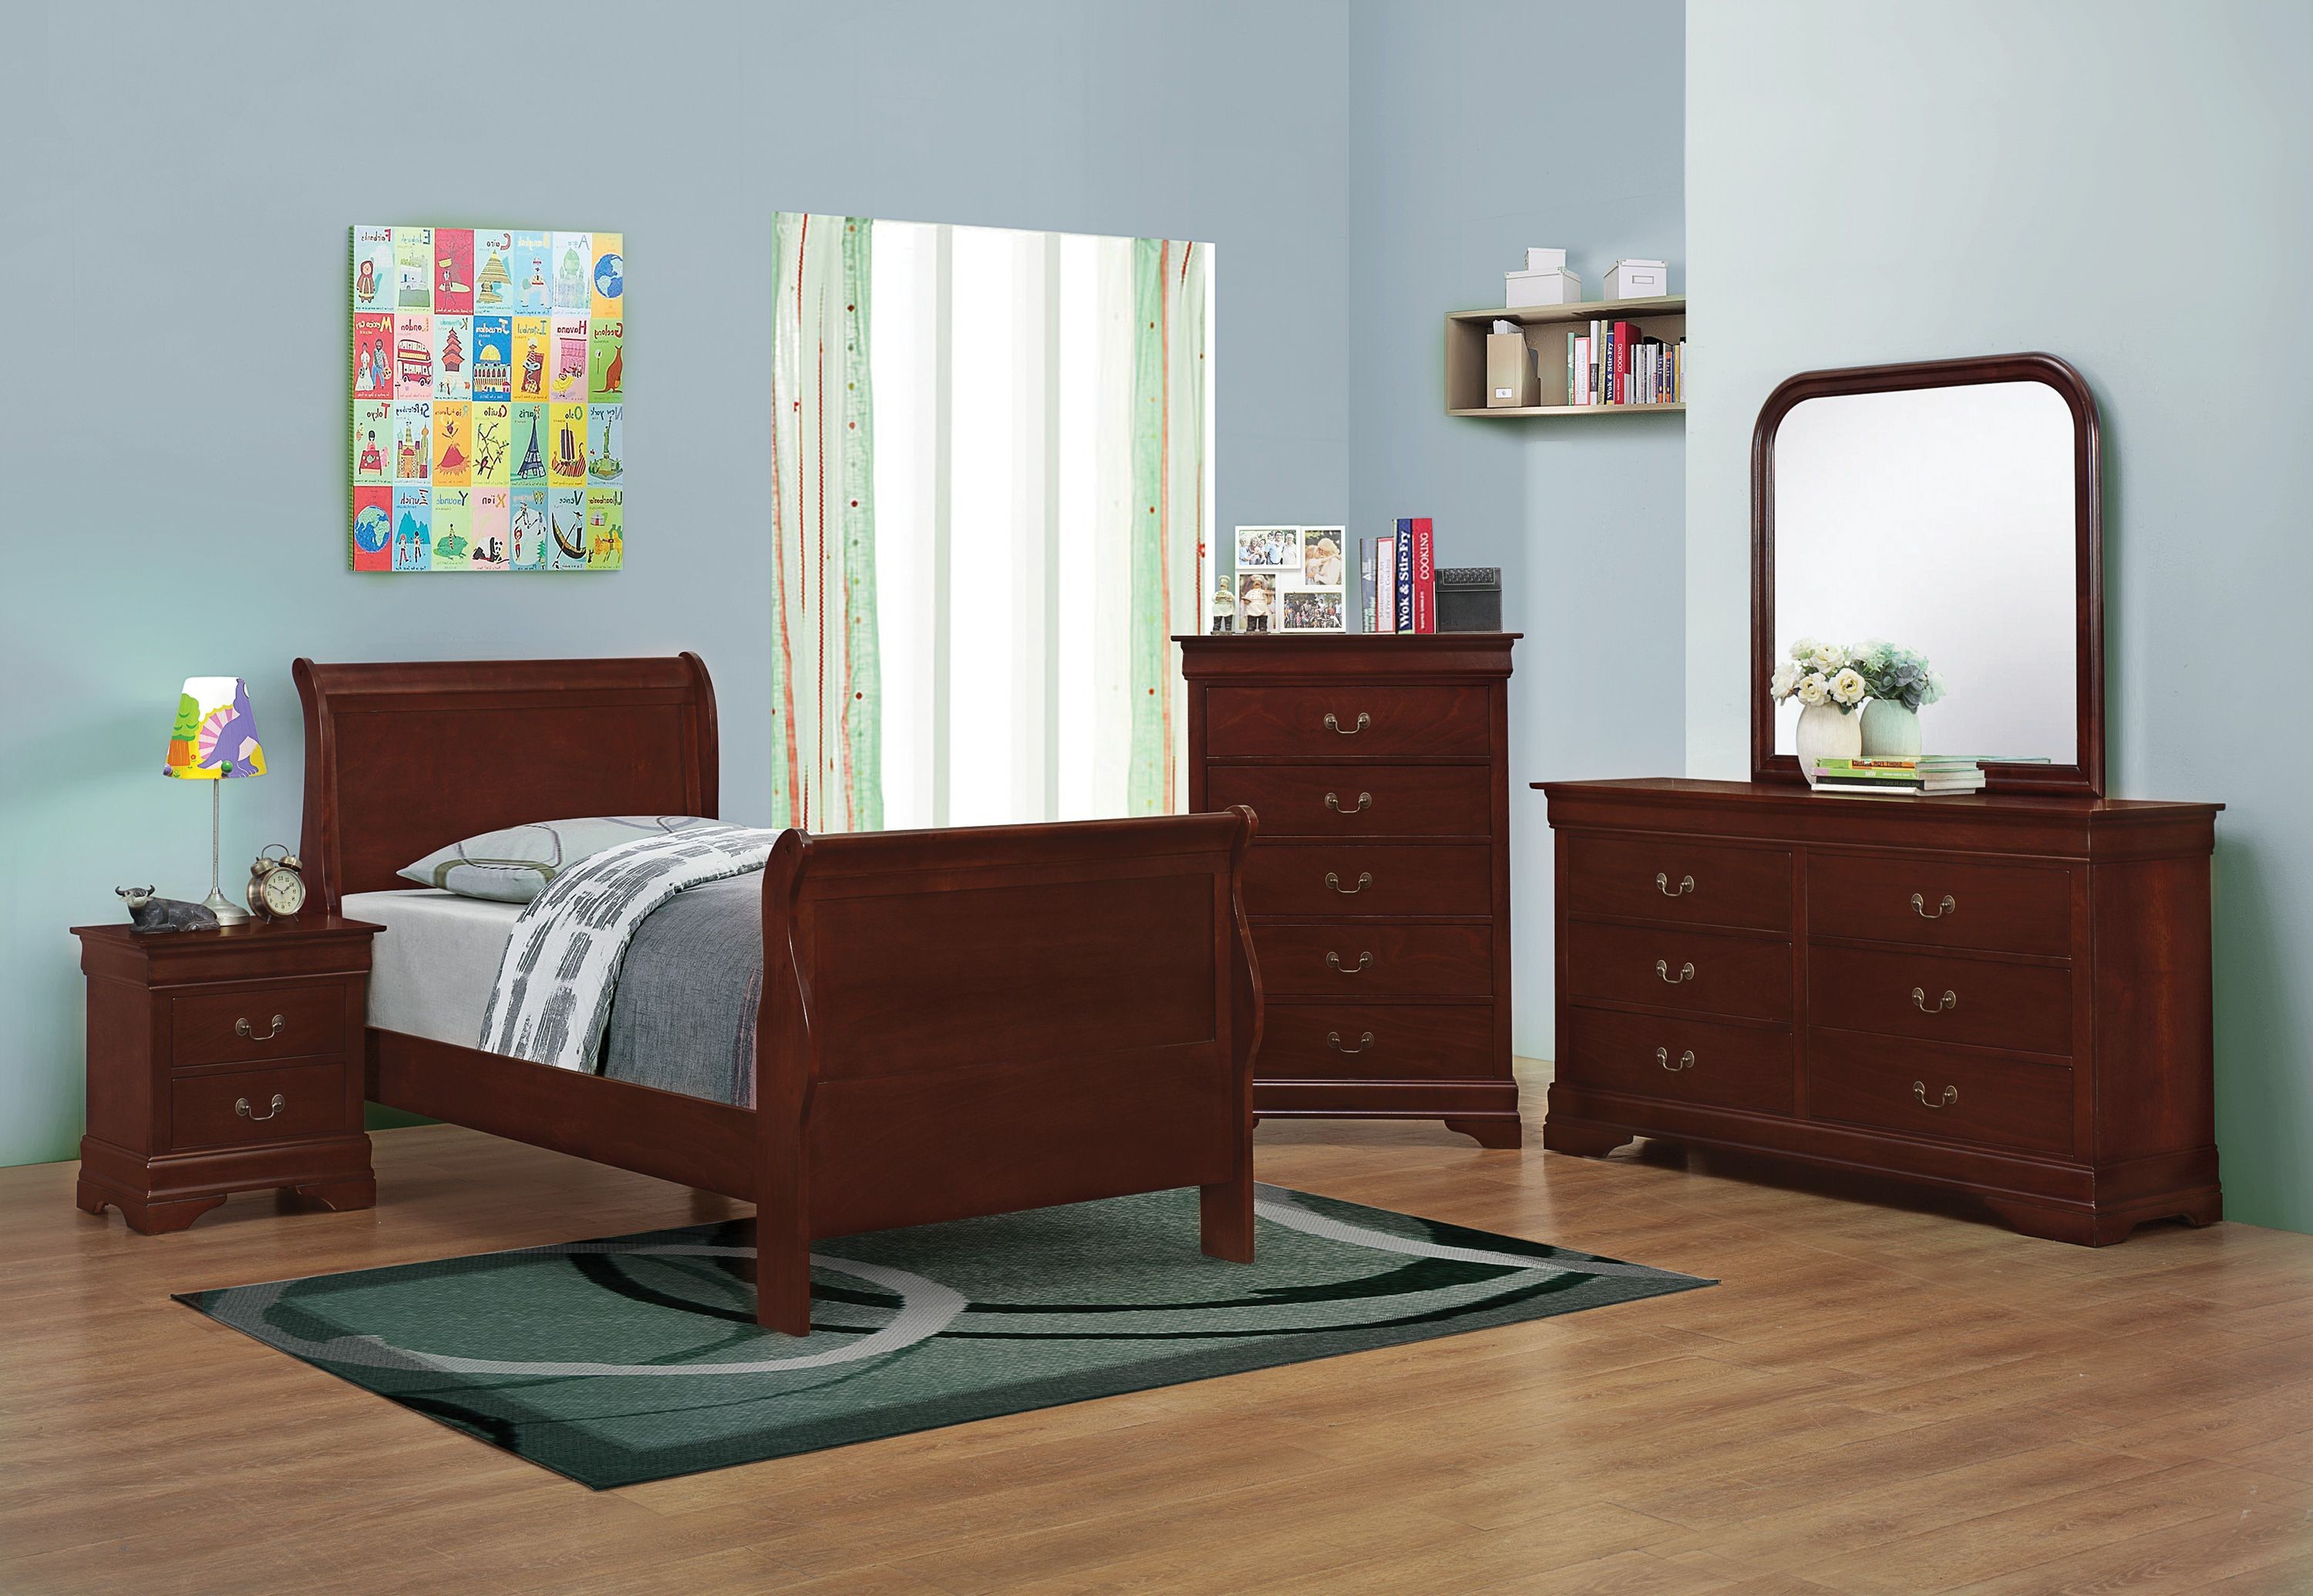 Coaster® Louis Philippe 5 Piece Red Brown Full Sleigh Bedroom Set